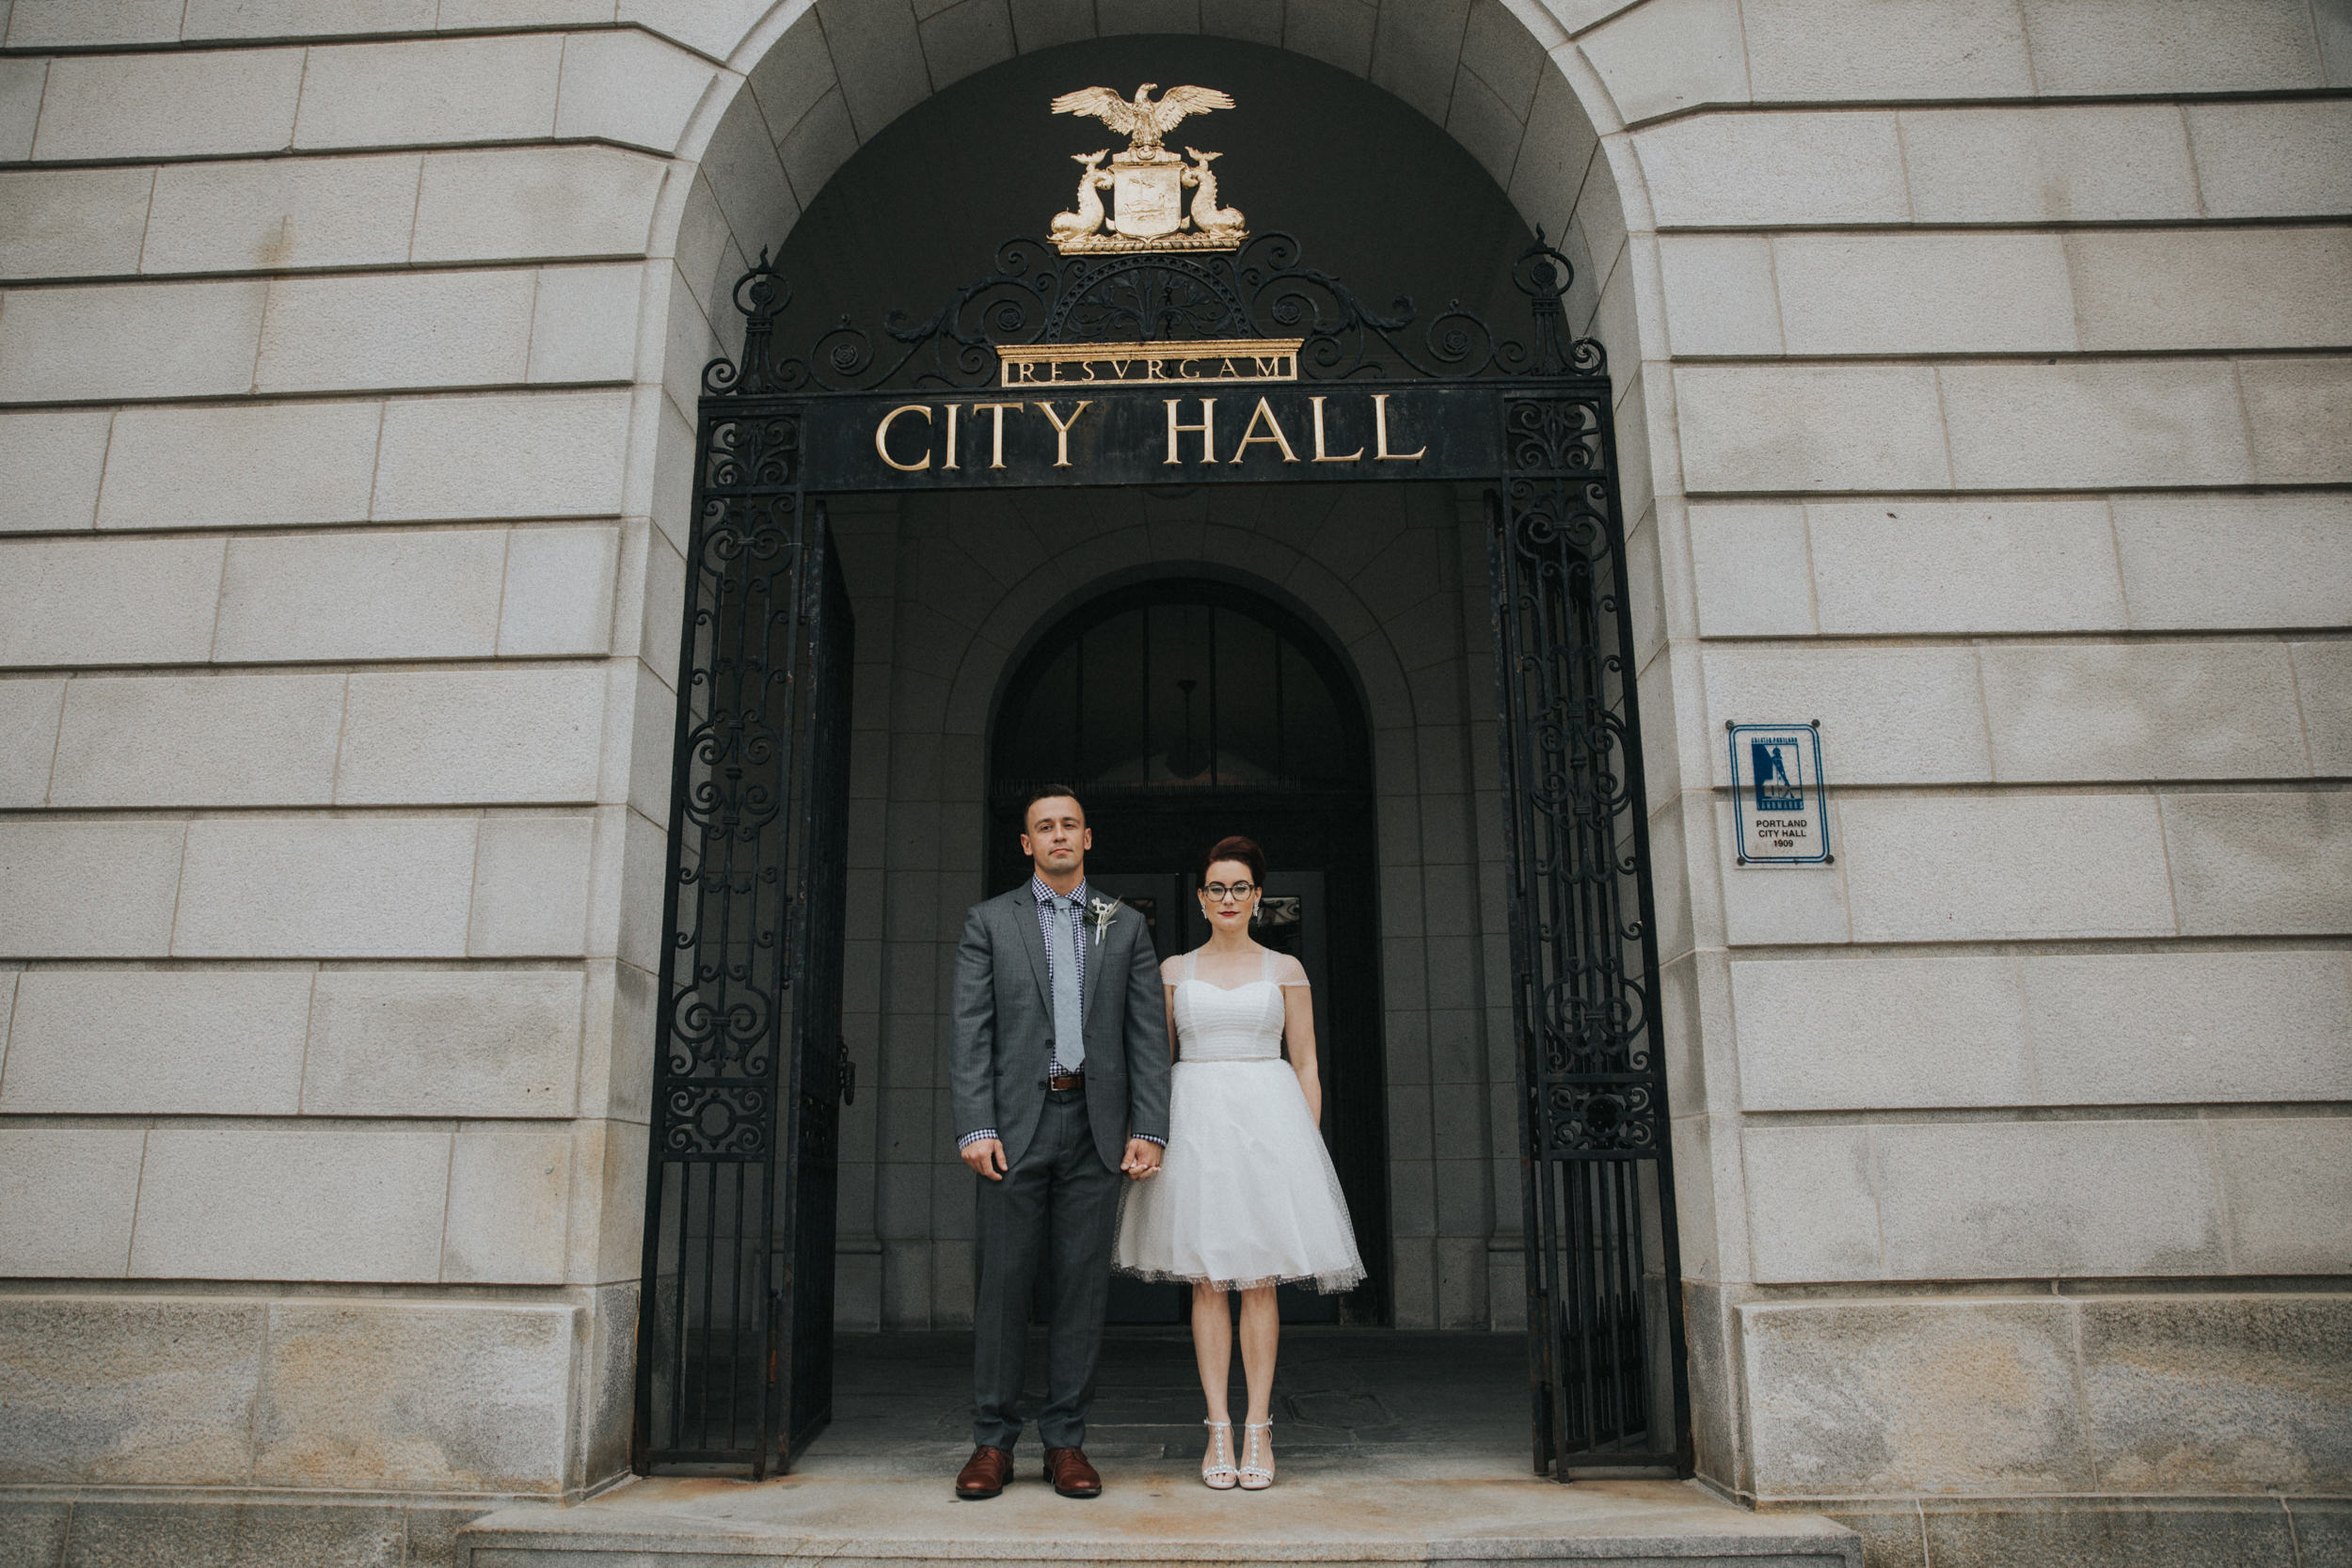  Portland, Maine City Hall bride and groom after eloping 